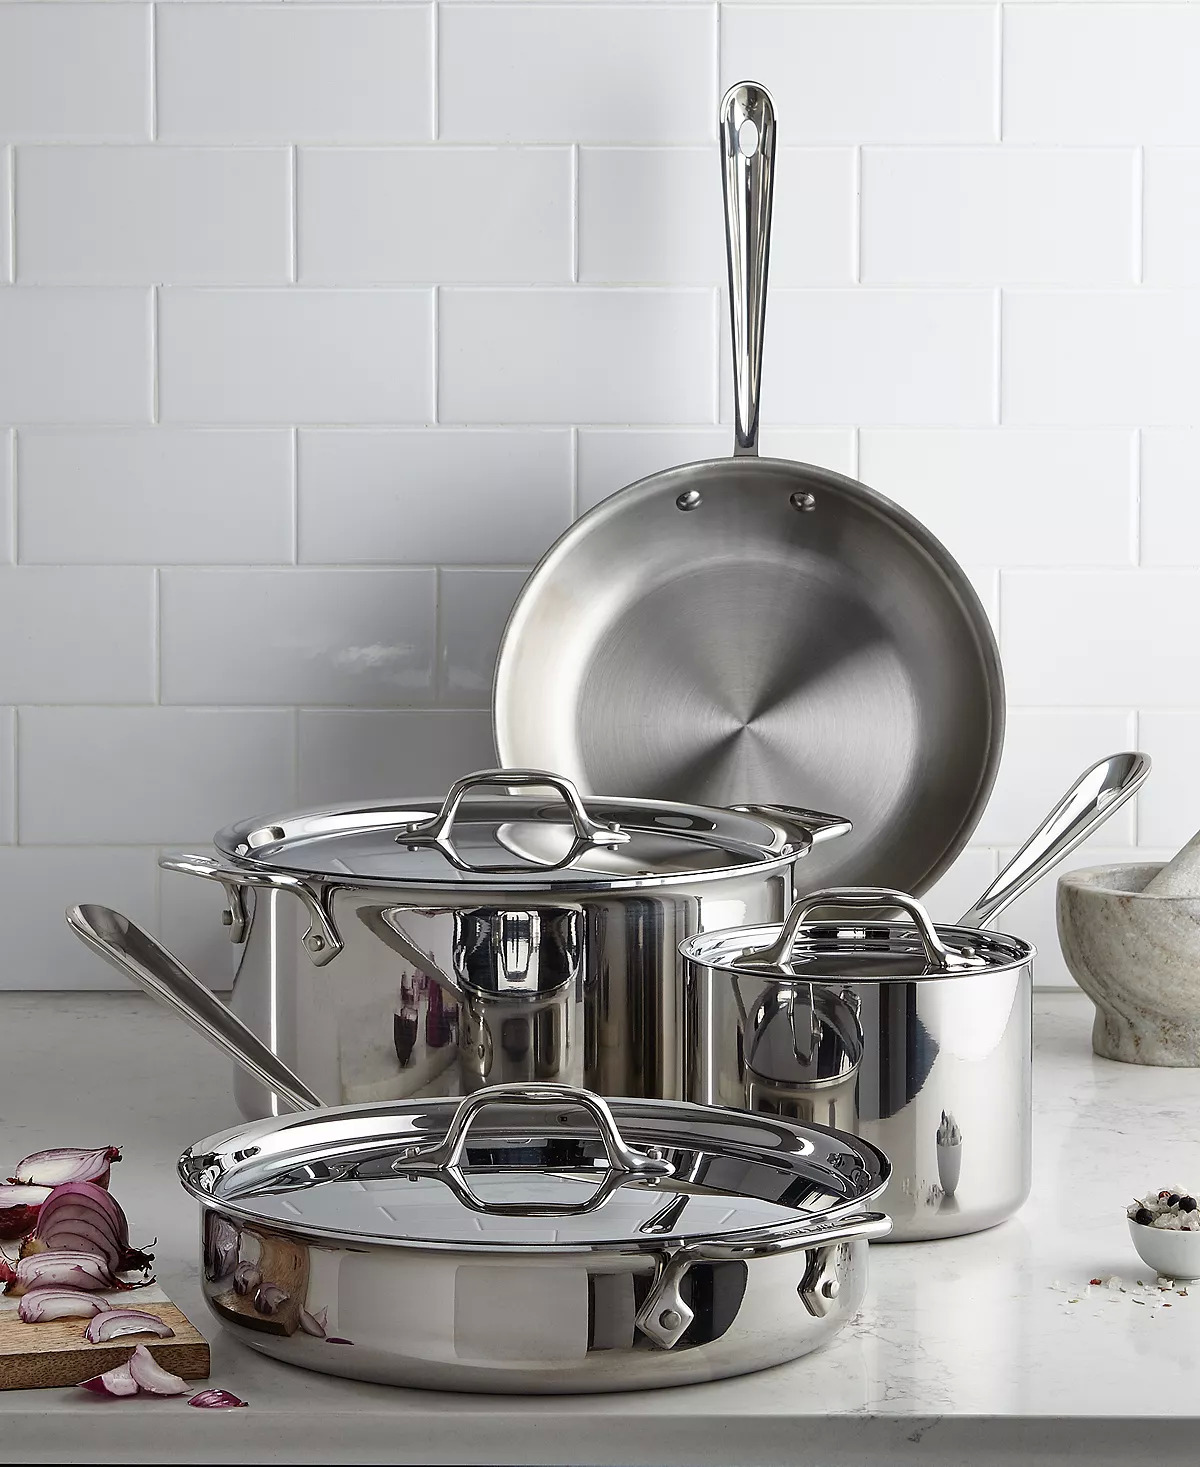 All-Clad D3 Stainless Steel Cookware 7 piece $299